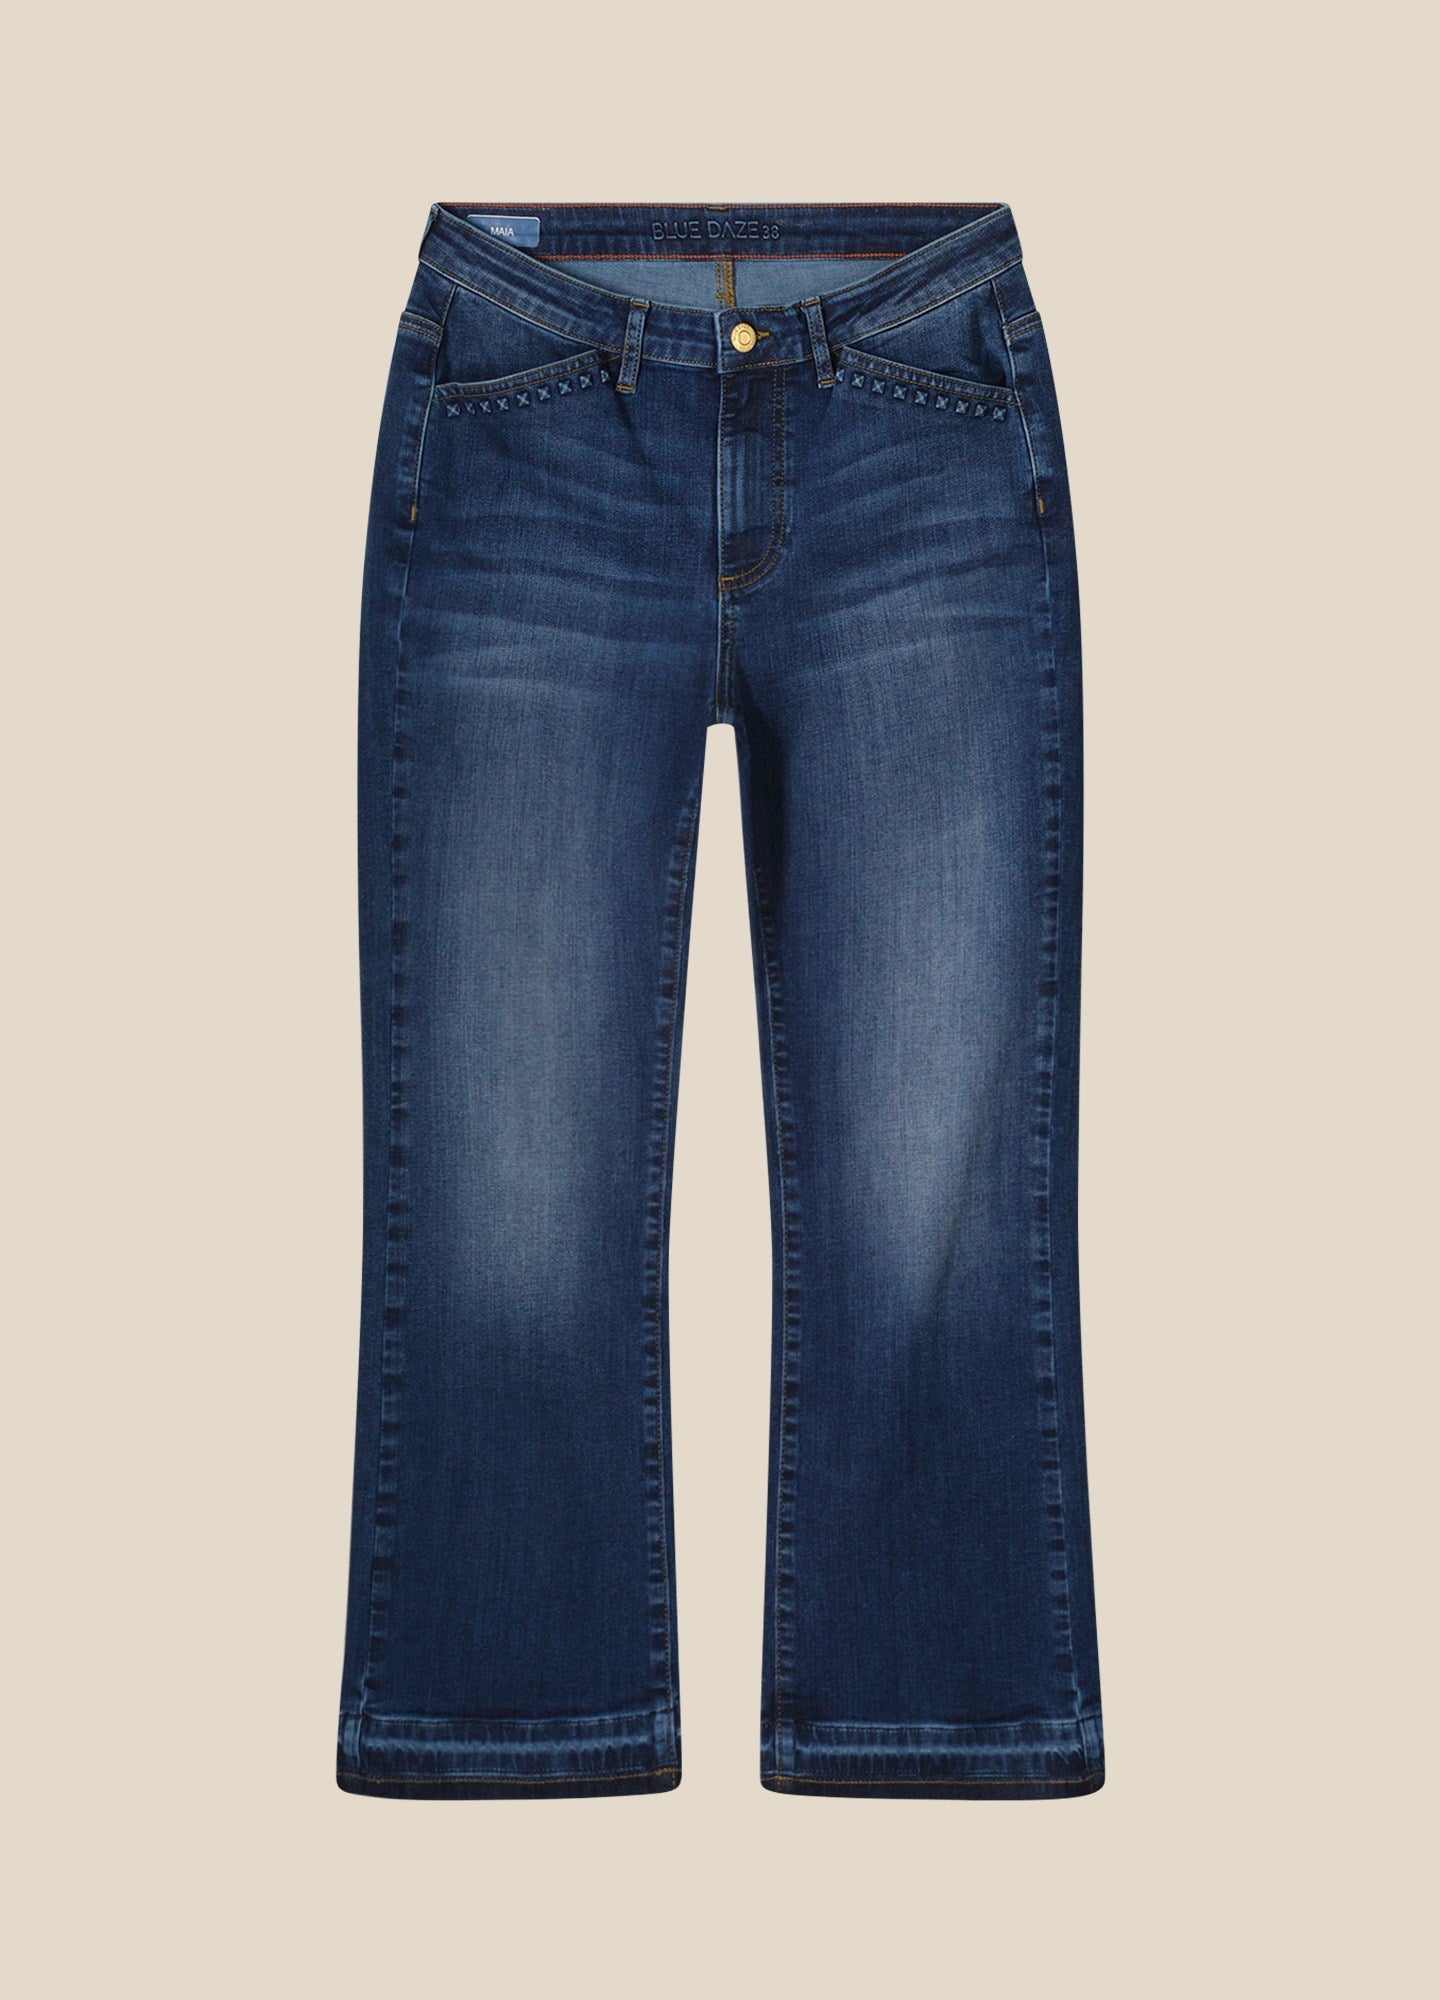 Bootcup cropped jeans